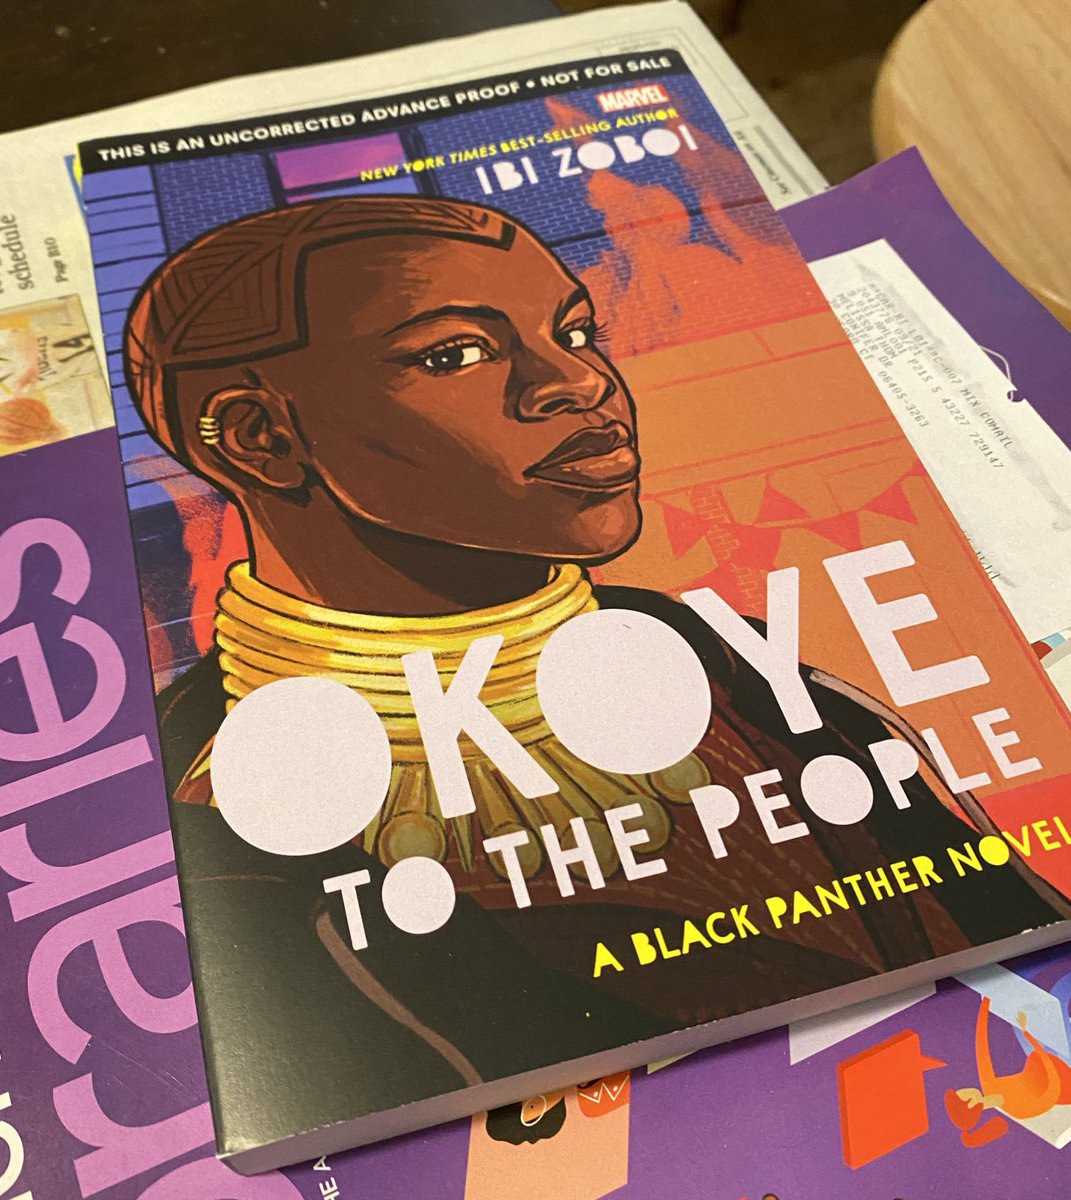 Came home to some amazing #bookmail! Can’t wait to start reading #OkoyeToThePeople by @ibizoboi. 🎉☺️📚 @Dina_at_Disney @disneybooks #bookposse